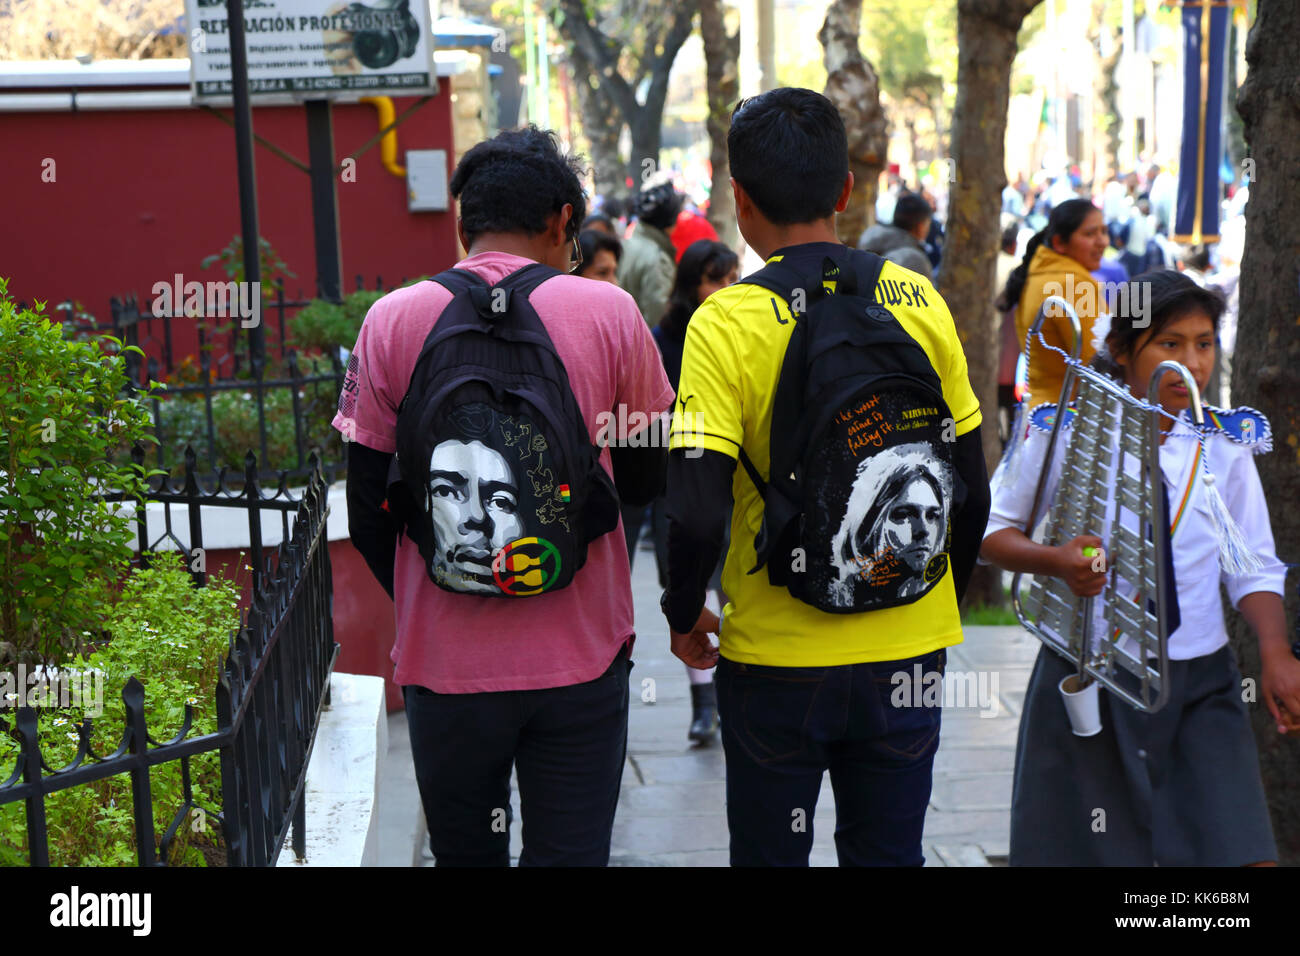 Youths wearing rucksacks with faces of Jimi Hendrix (L) and Kurt Cobain (R) on them walking in street, La Paz, Bolivia Stock Photo